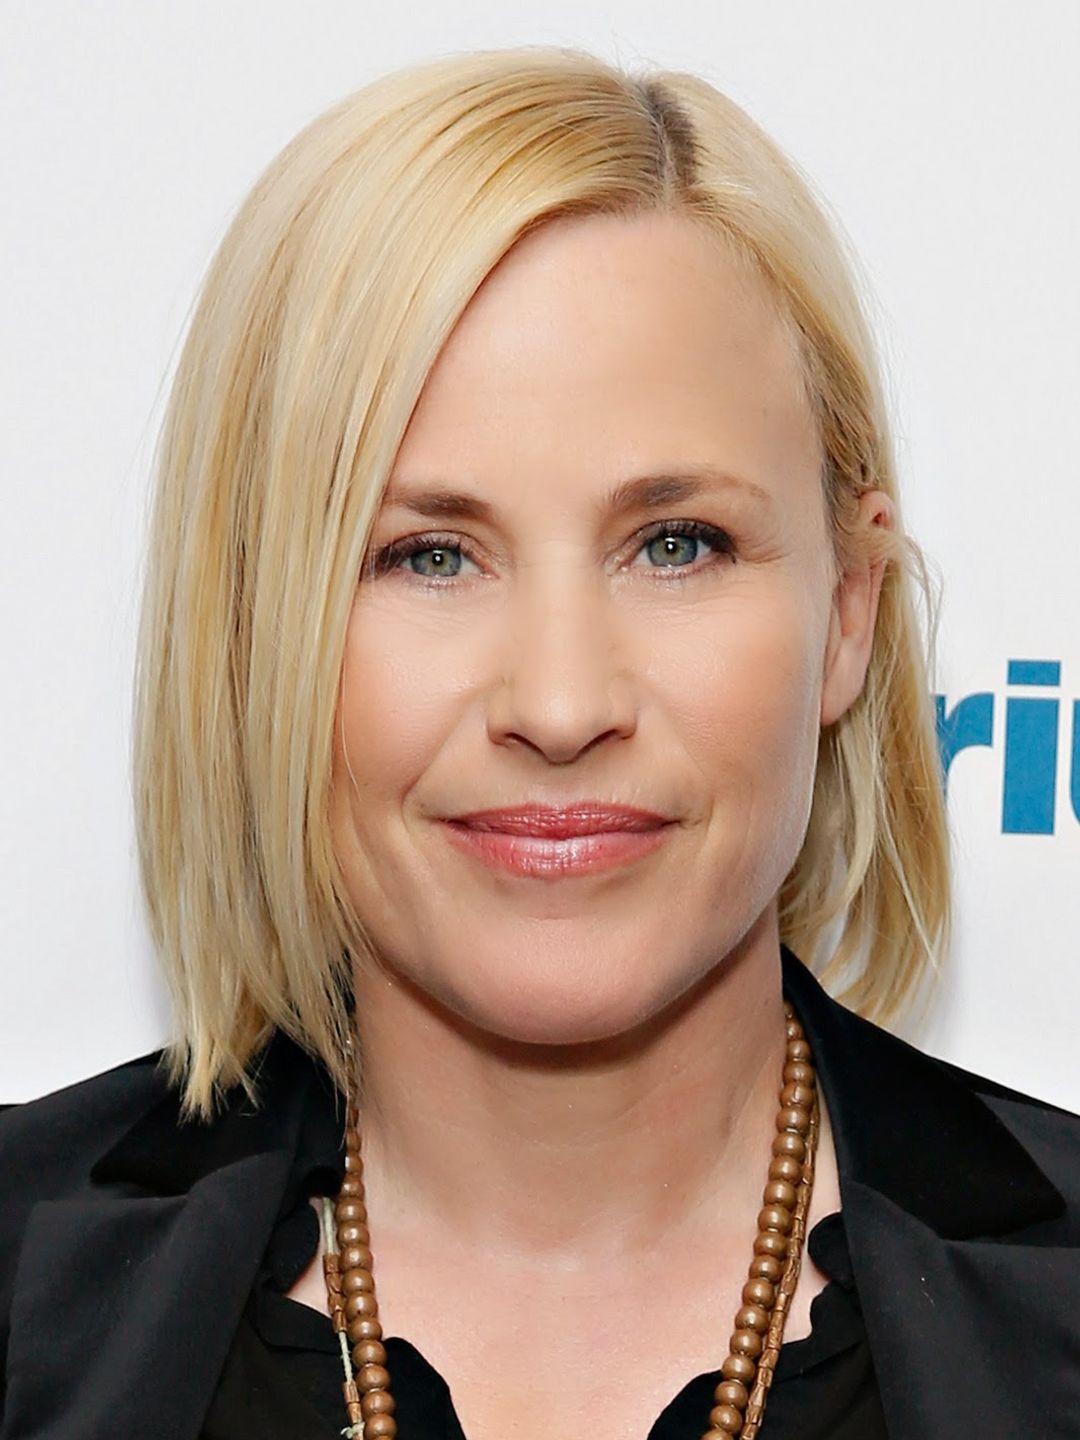 Patricia Arquette way to fame